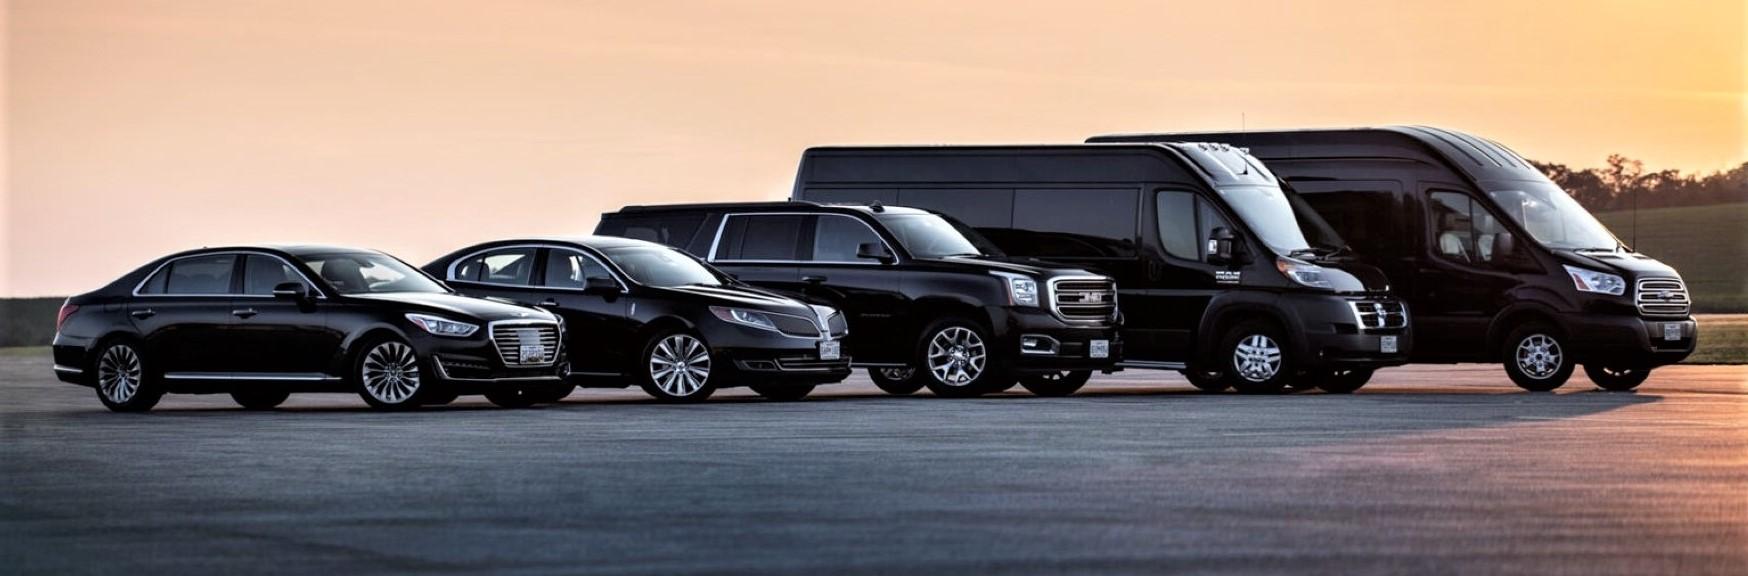 Houston Limo Services for Sporting Events